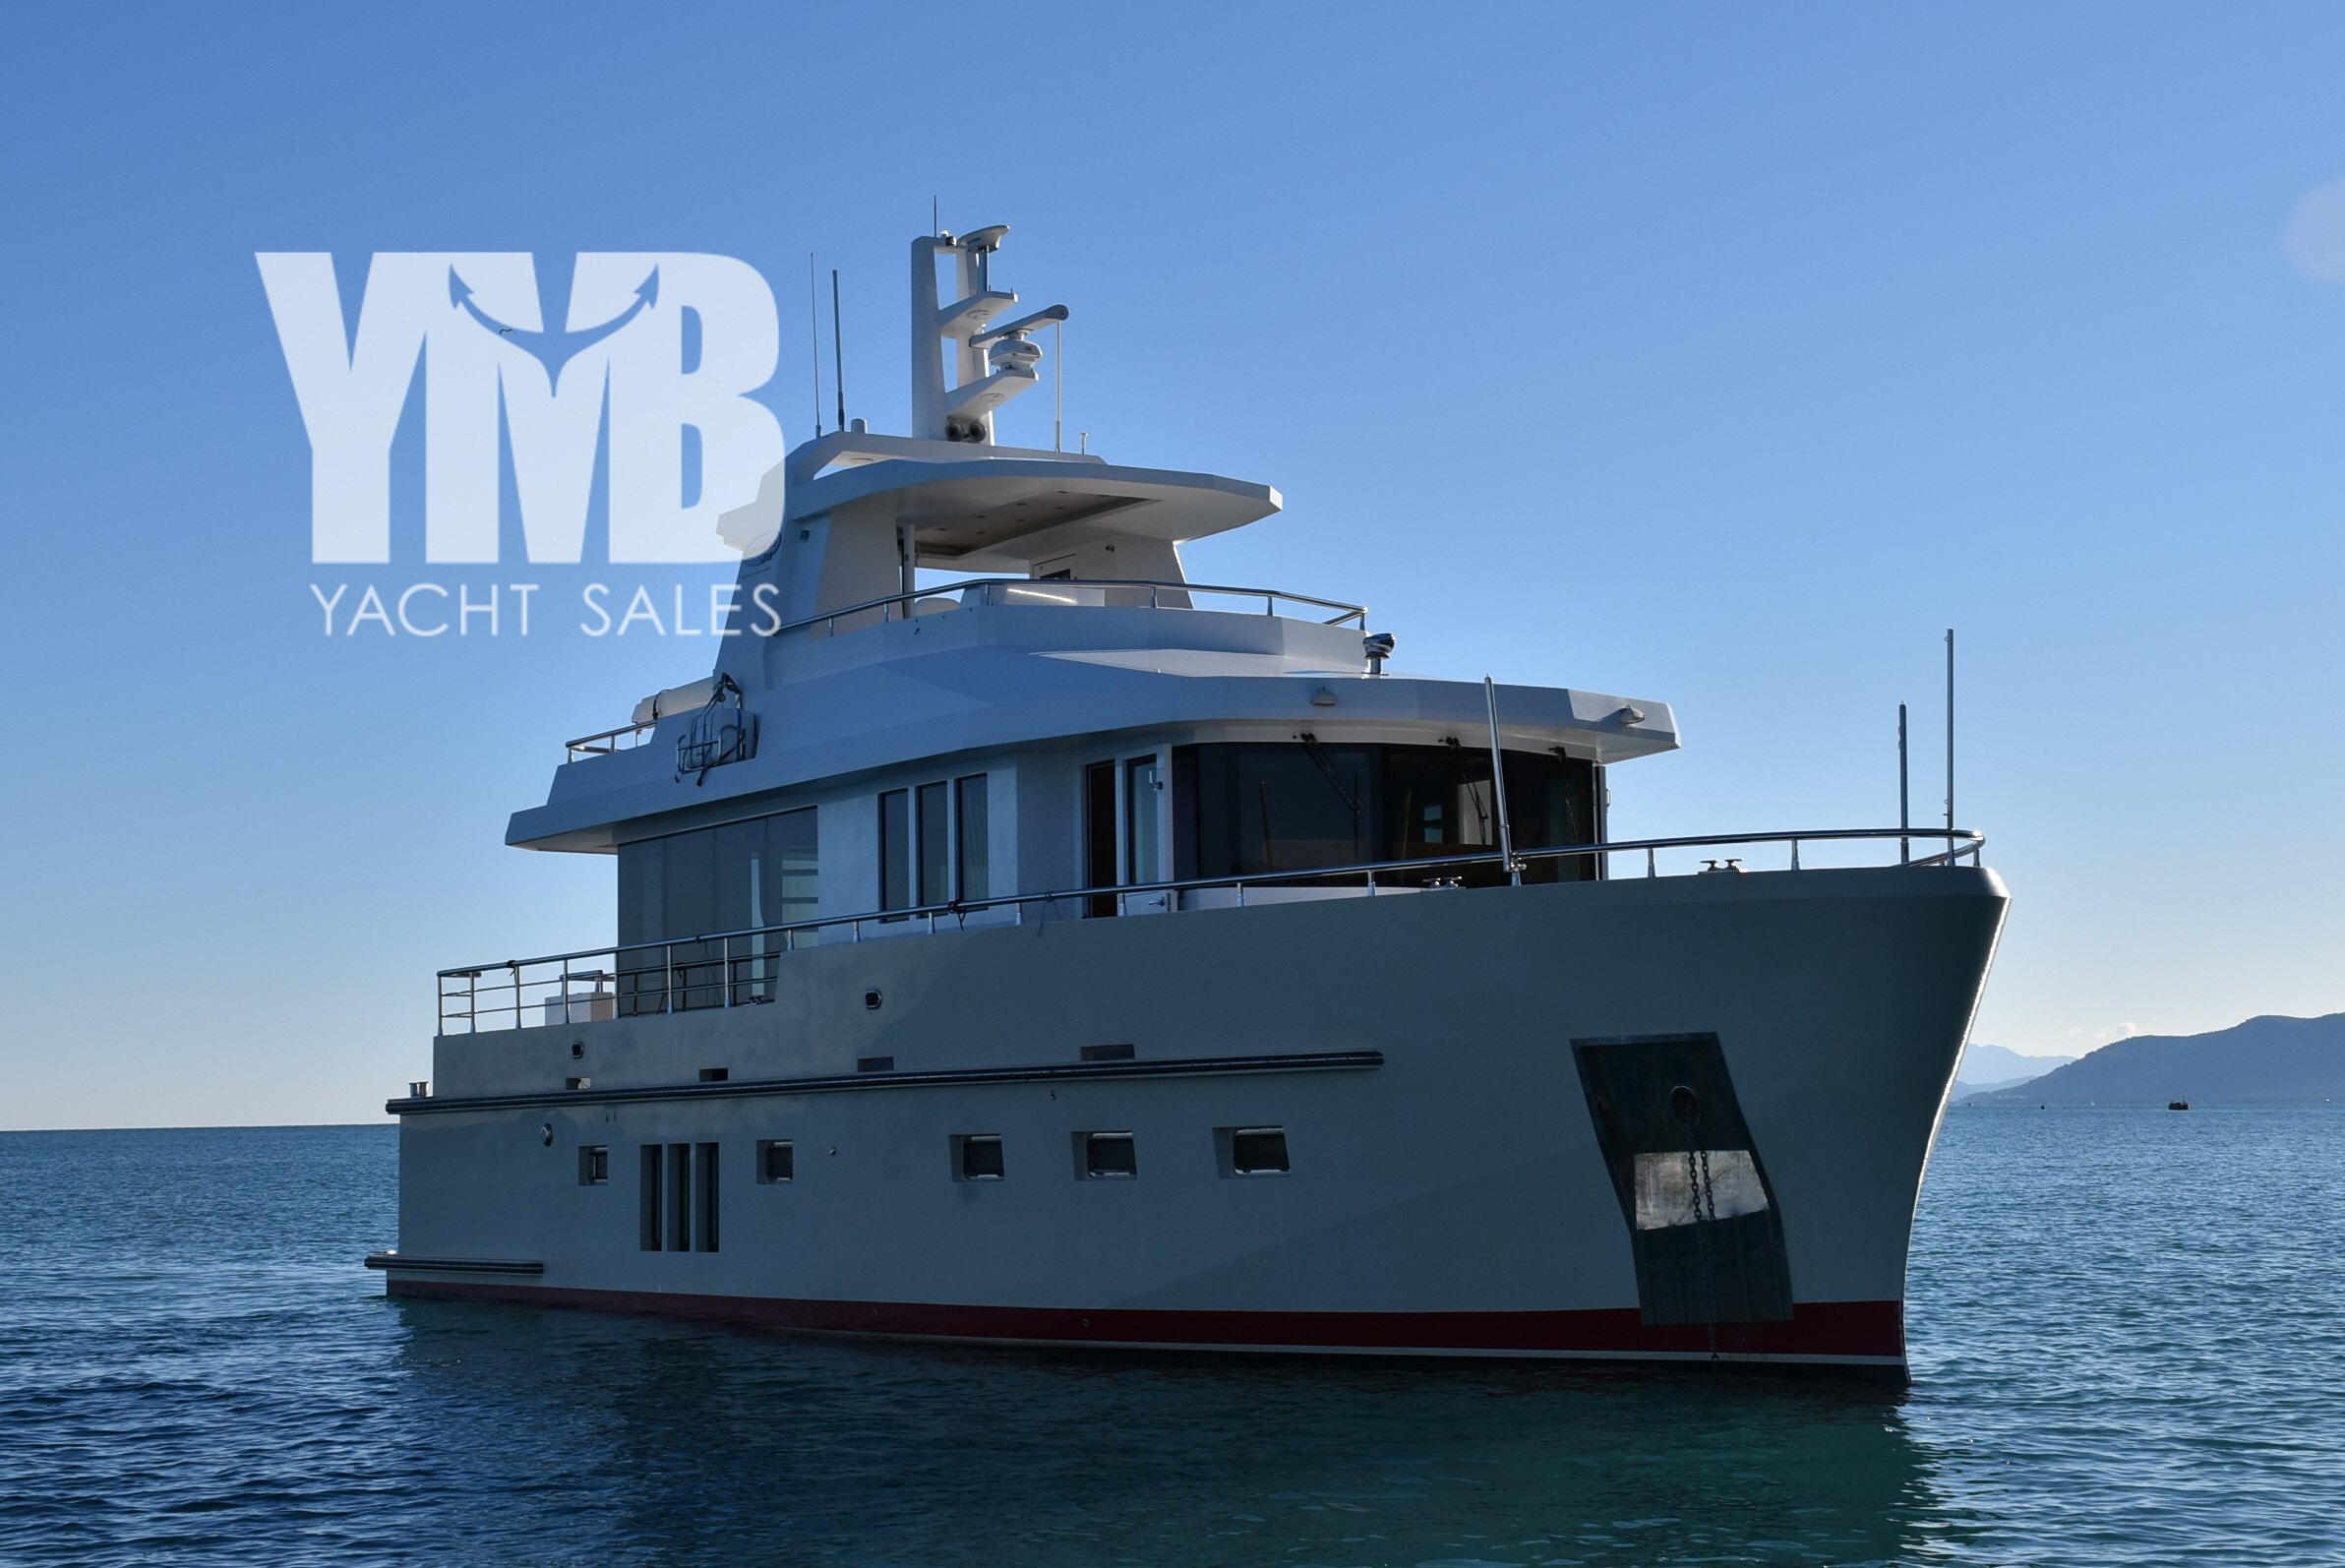 18 meter yacht for sale